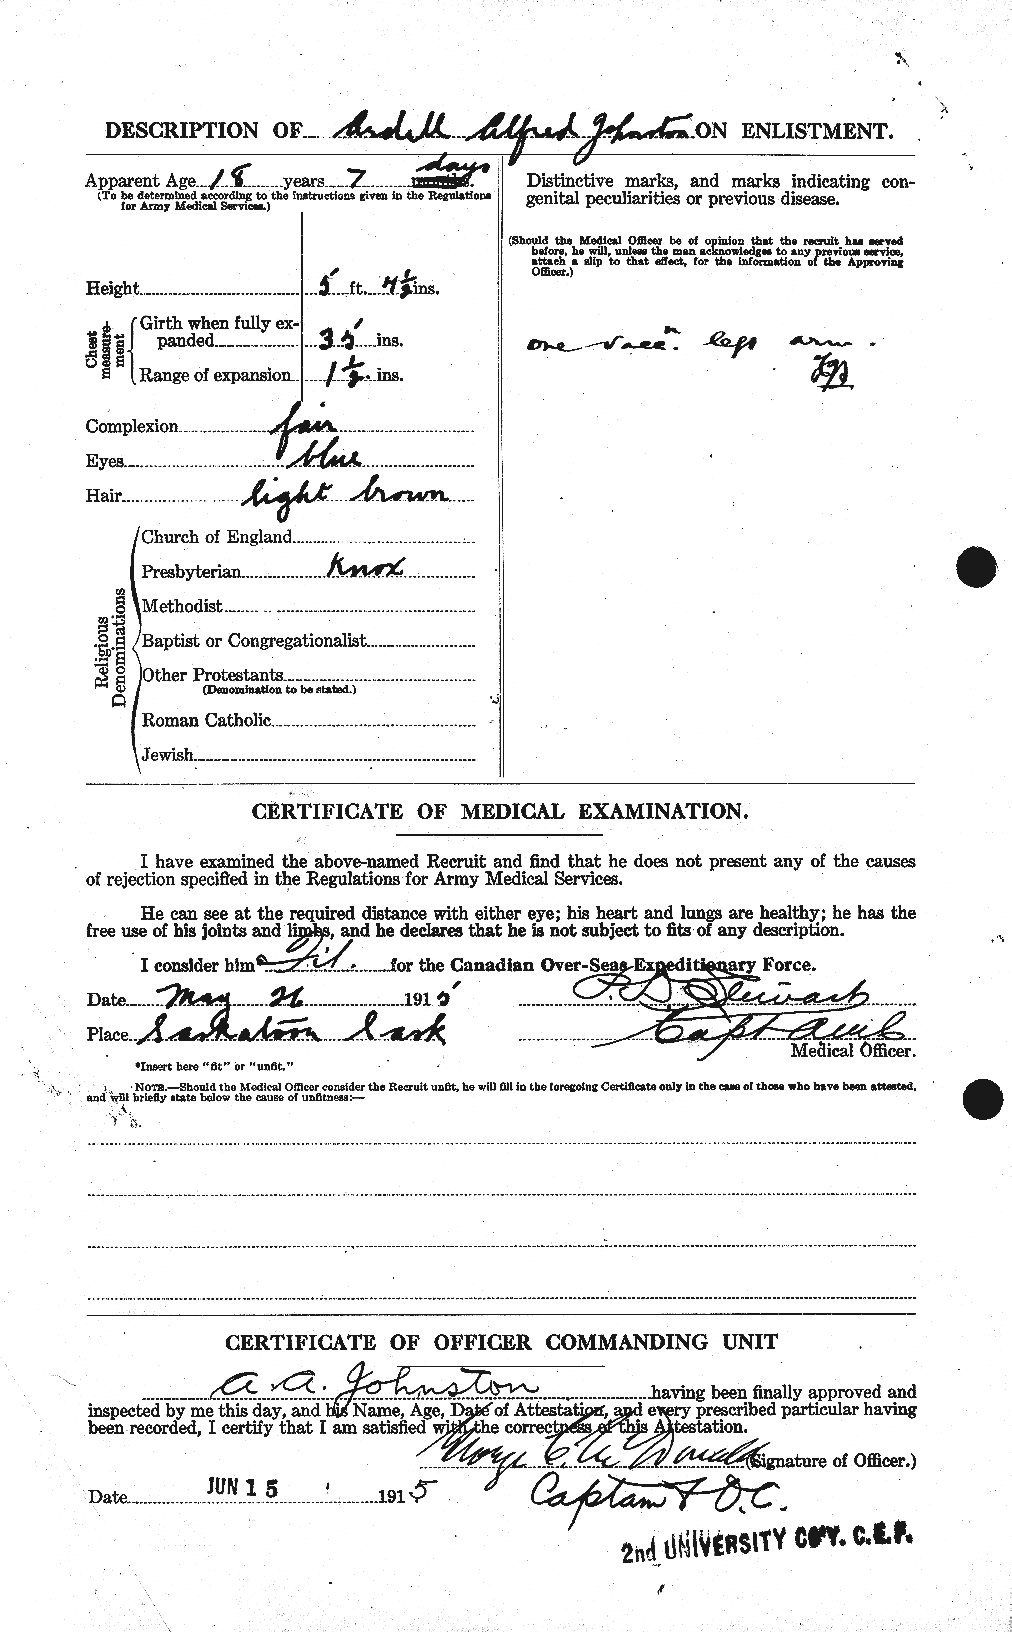 Personnel Records of the First World War - CEF 421032b